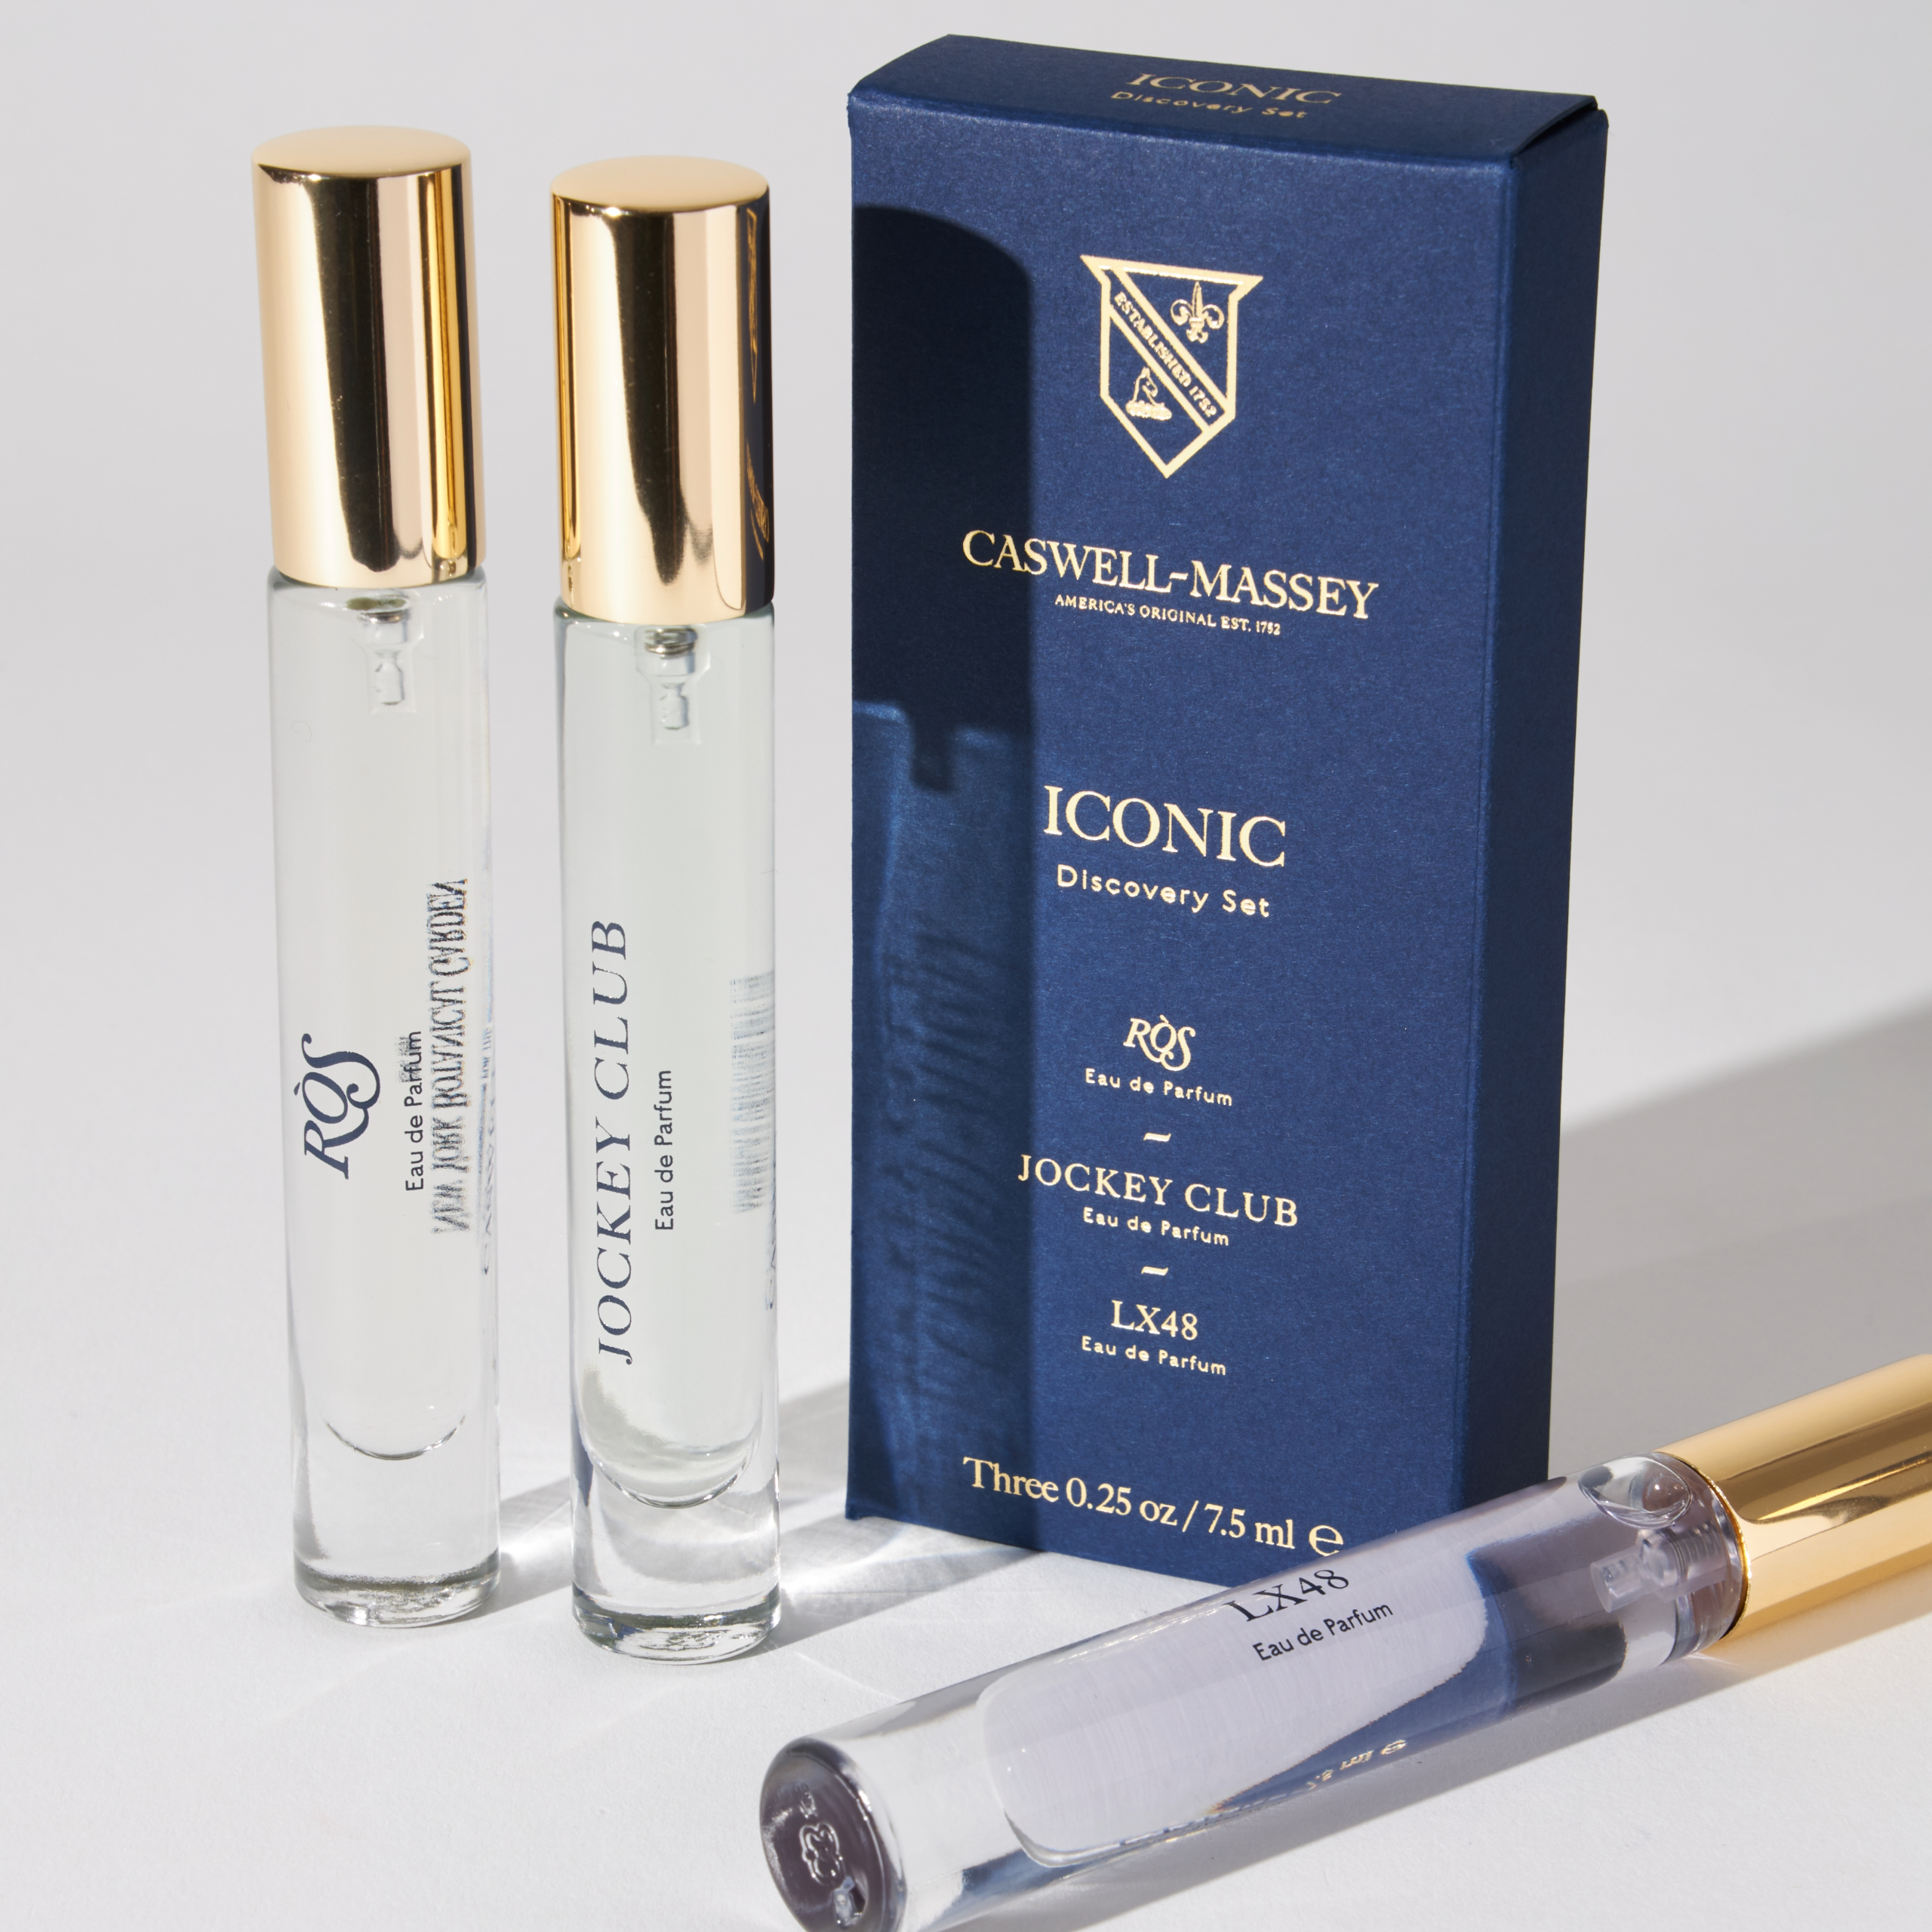 Caswell-Massey Iconic Fragrance Discovery Set of 3 fragrance wands 7.5ml: RÒS, Jockey Club, and LX48